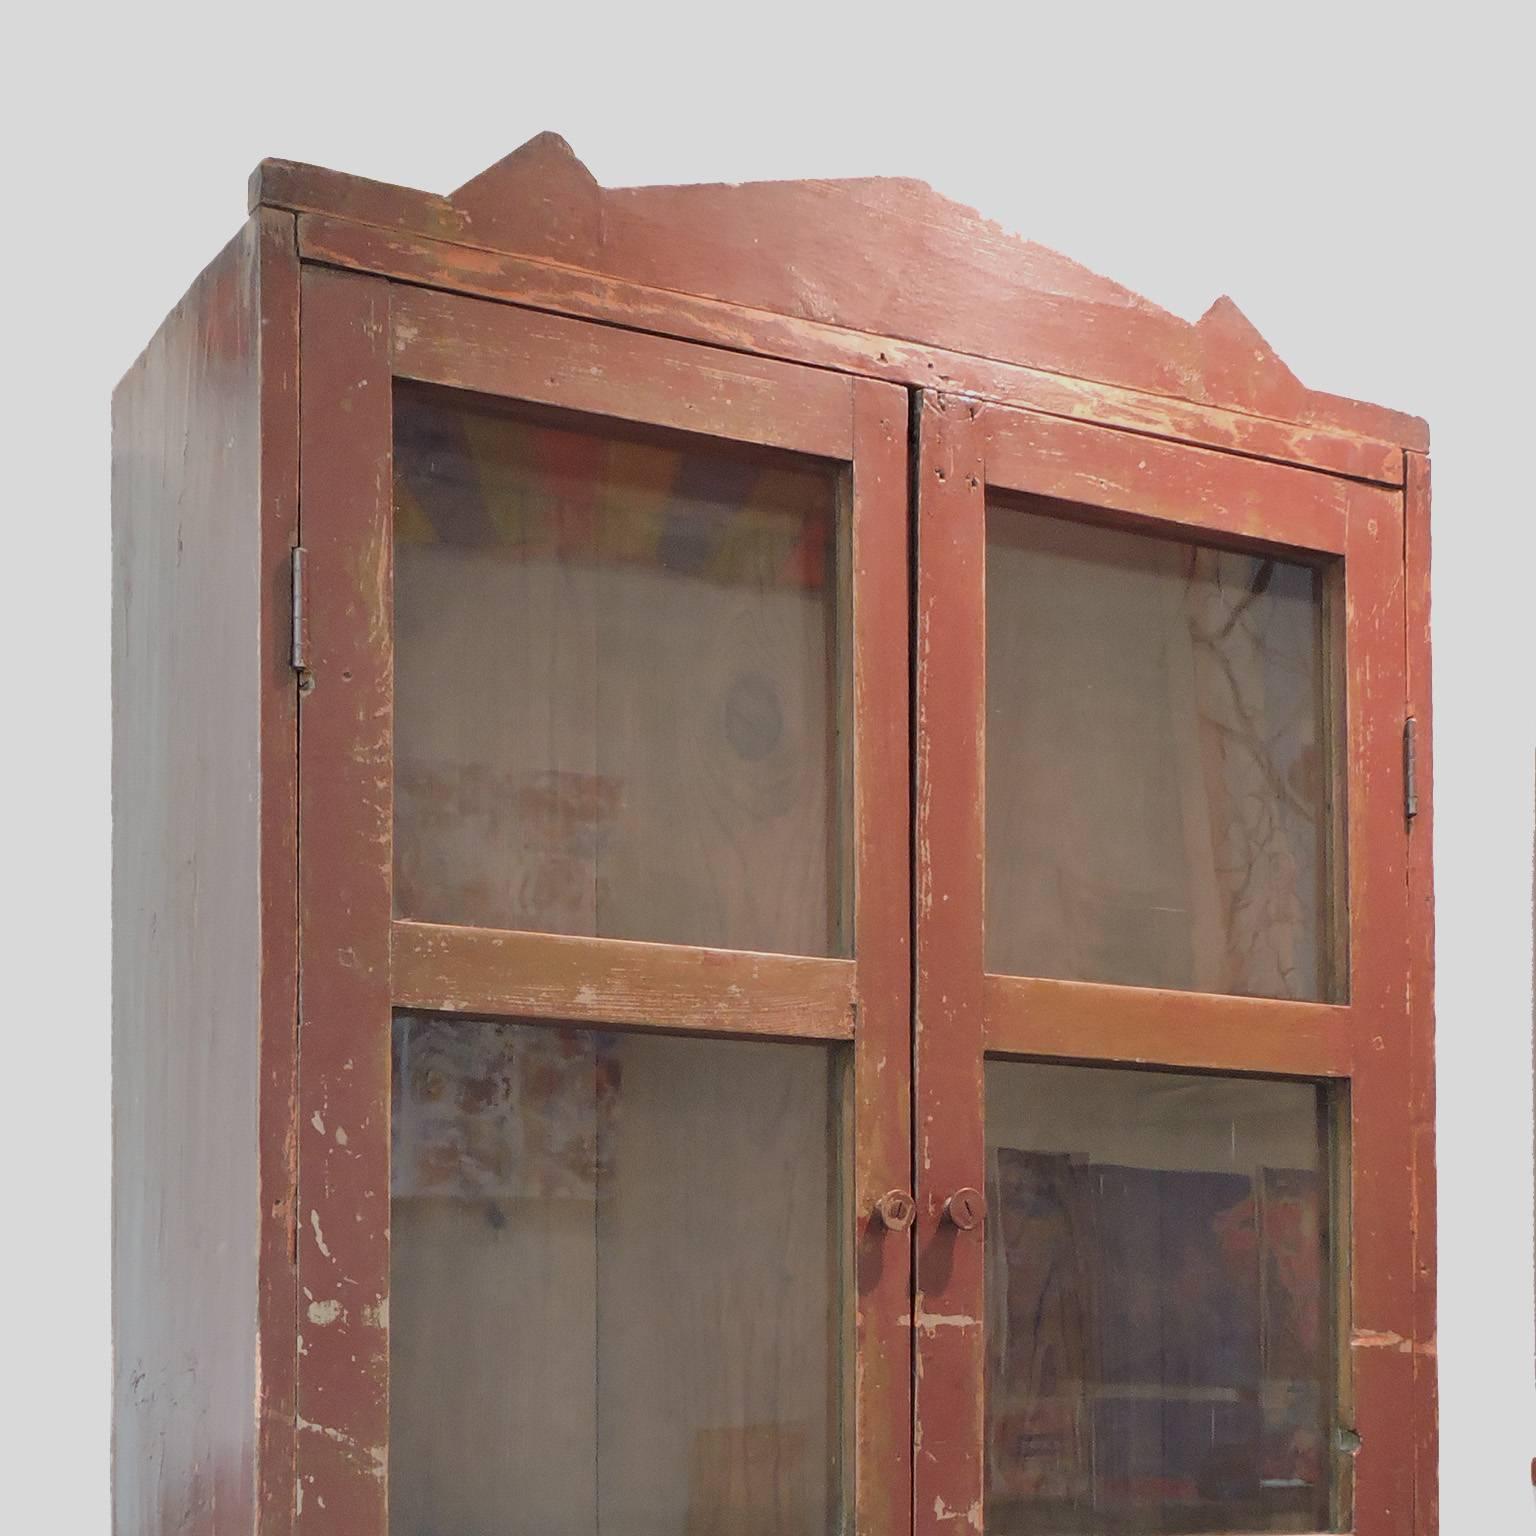 Terrific 19th century Mexican cupboard with original red paint, 19th century. Constructed in one piece with glass doors revealing two shelfs over a cabinet base raised on feet. Dimensions: 80 x 31 1/2 x 22 inches.